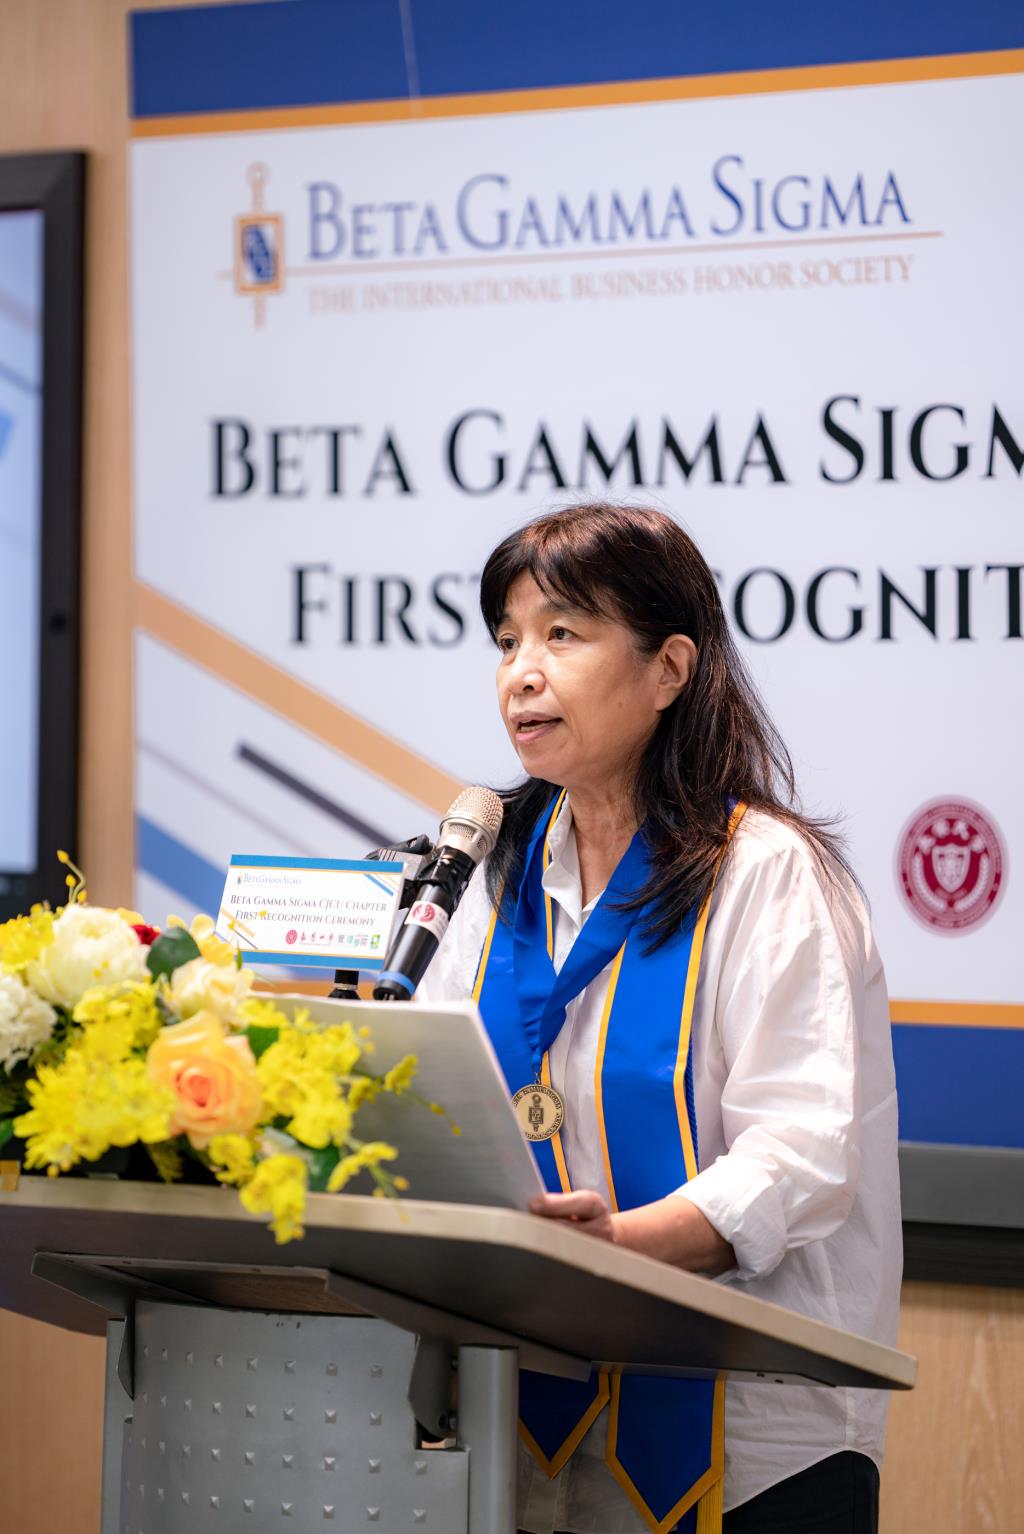 First Membership Recognition Ceremony at Beta Gamma Sigma CJCU Chapter on May 24, 2022 was rounded off!